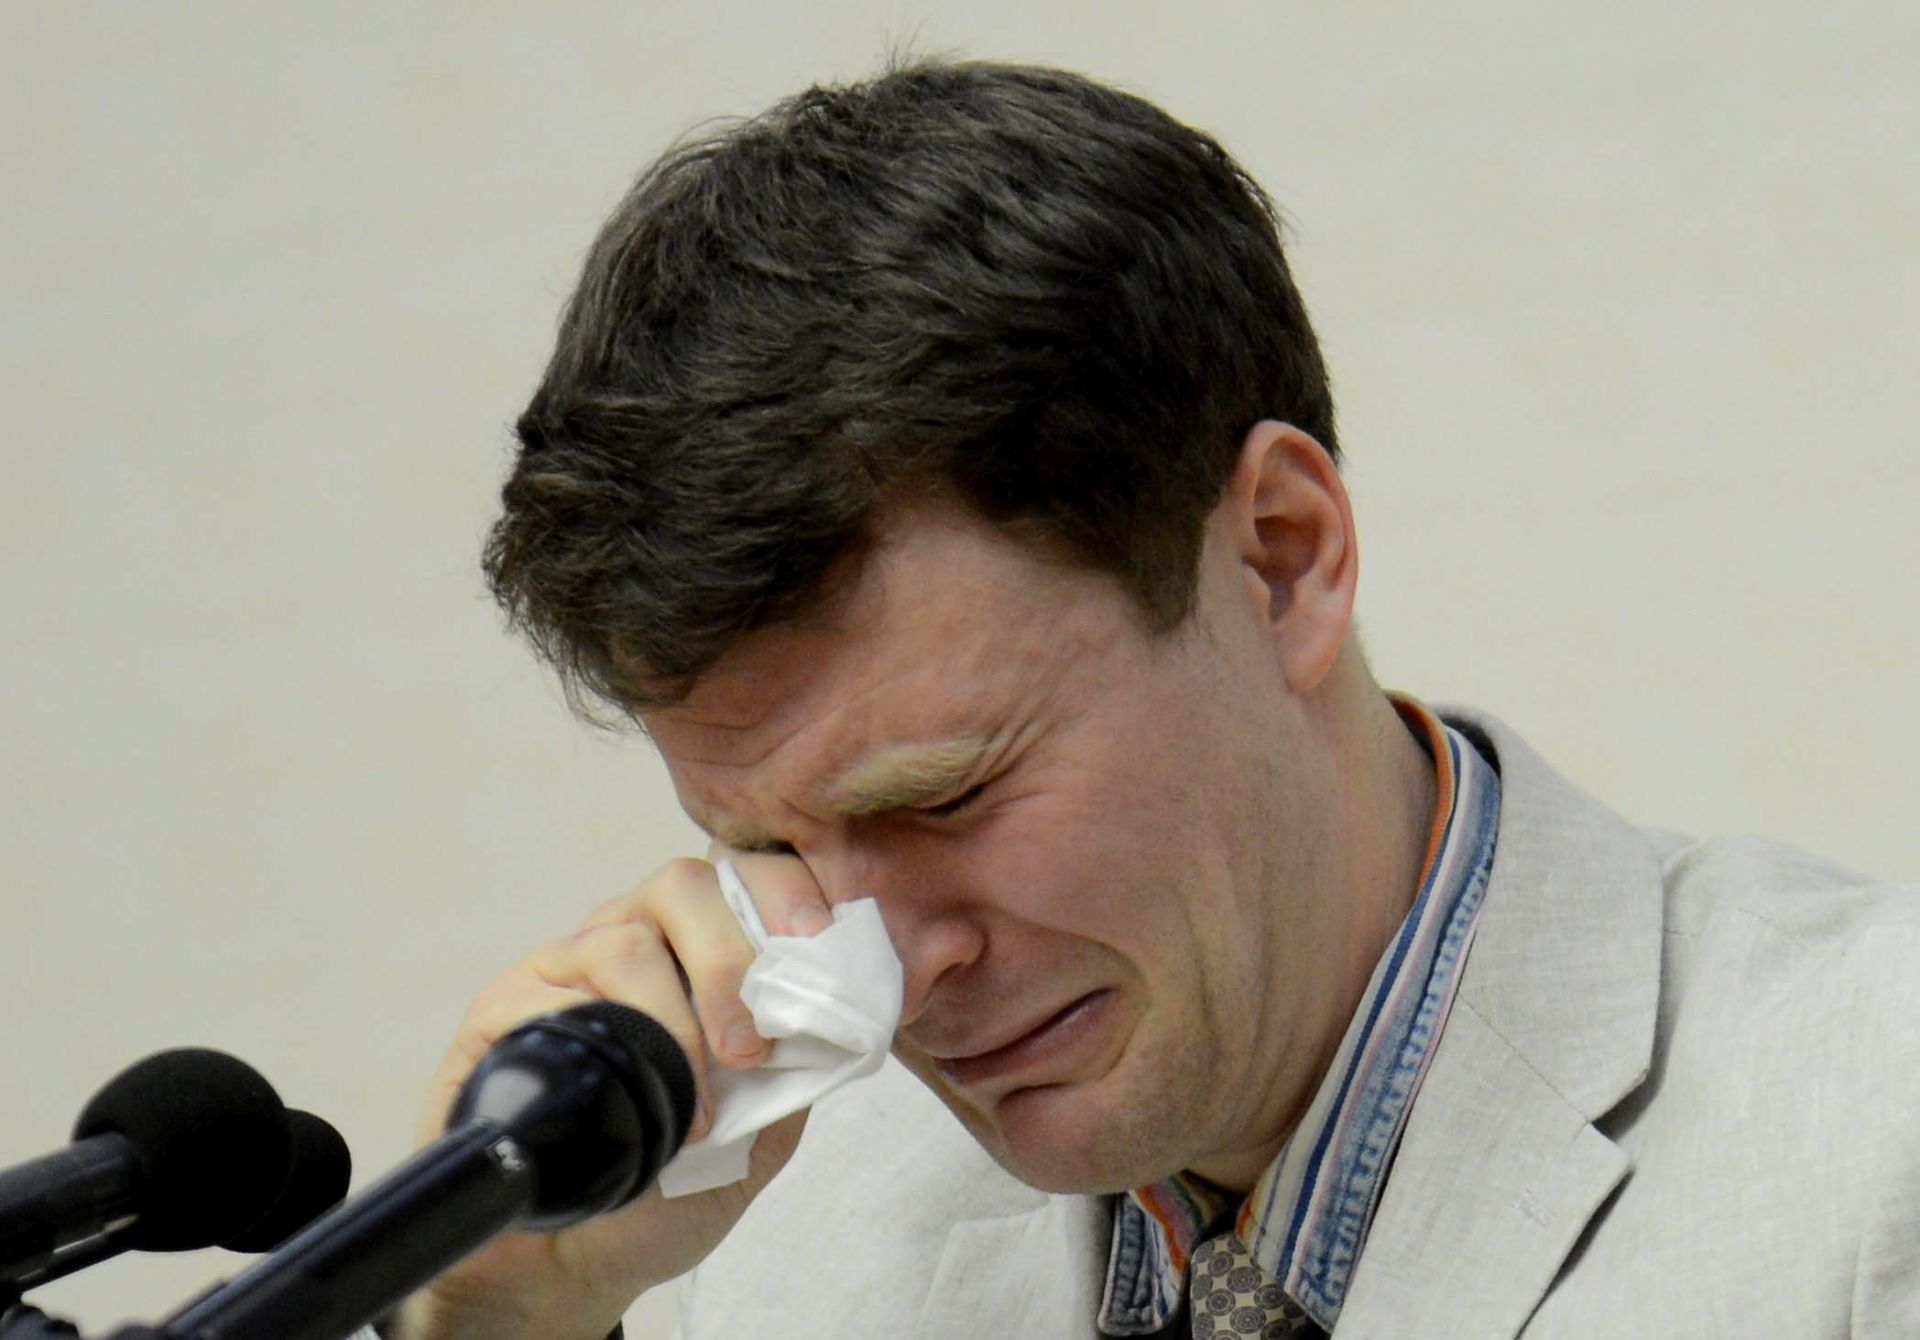 epa05188280 A handout photo provided by the official Korean Central News Agency (KCNA) via Yonhap News Agency (YNA) ON 01 March 2016 shows Otto Frederick Warmbier, a University of Virginia student who has been detained in North Korea since January 2016, crying during a press conference at the People's Palace of Culture in Pyongyang, North Korea, 29 February 2016. Warmbier admitted to his 'severe' crime of stealing a political sign from a hotel and asked for forgiveness, according to KCNA.  EPA/KCNA/HANDOUT SOUTH KOREA OUT HANDOUT EDITORIAL USE ONLY/NO SALES